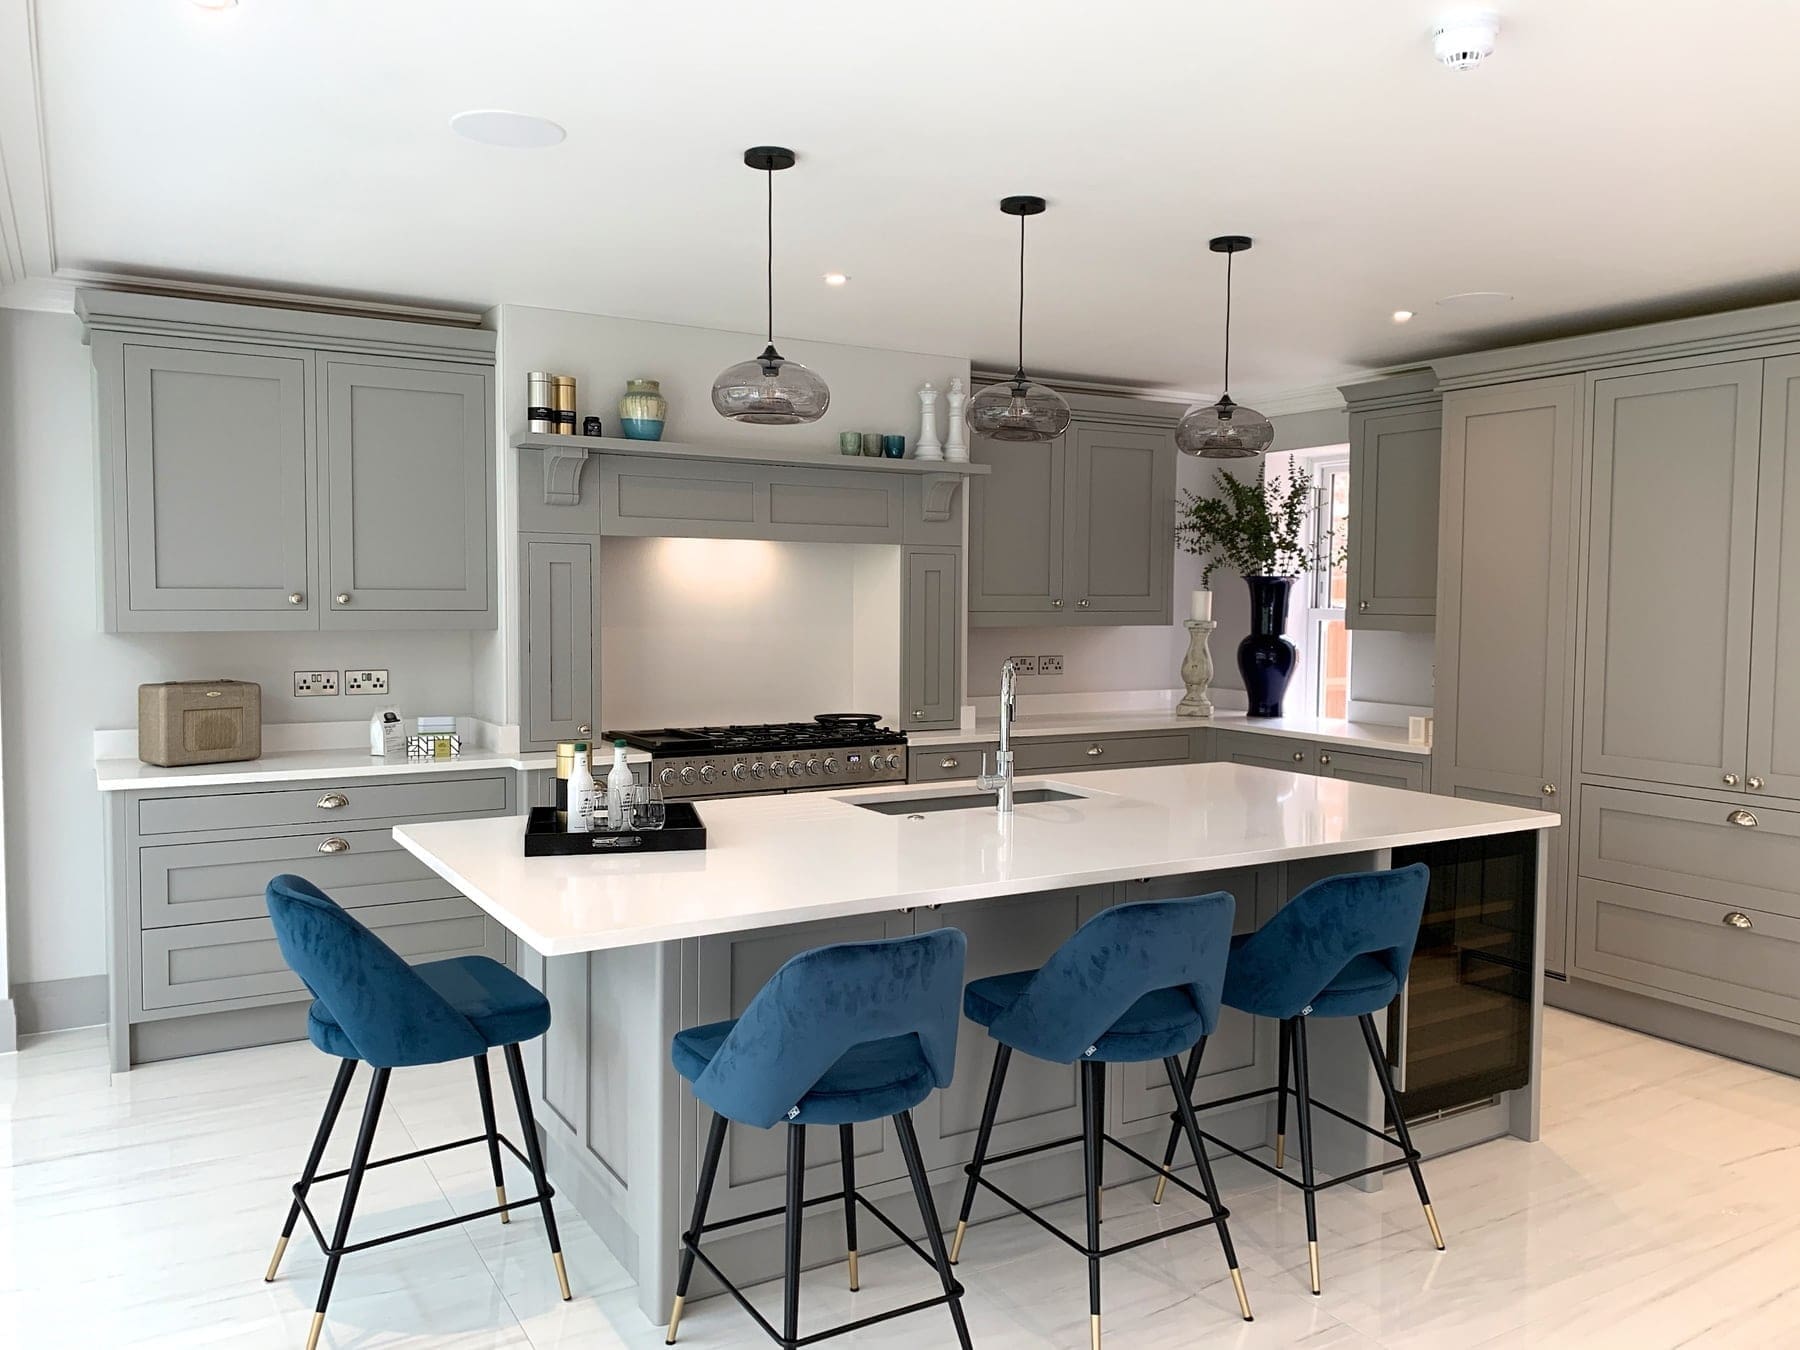 Feature Packed Contemporary Kitchen Egger Monochrome 1394 1 | Utopia Kitchens | Crowthorne